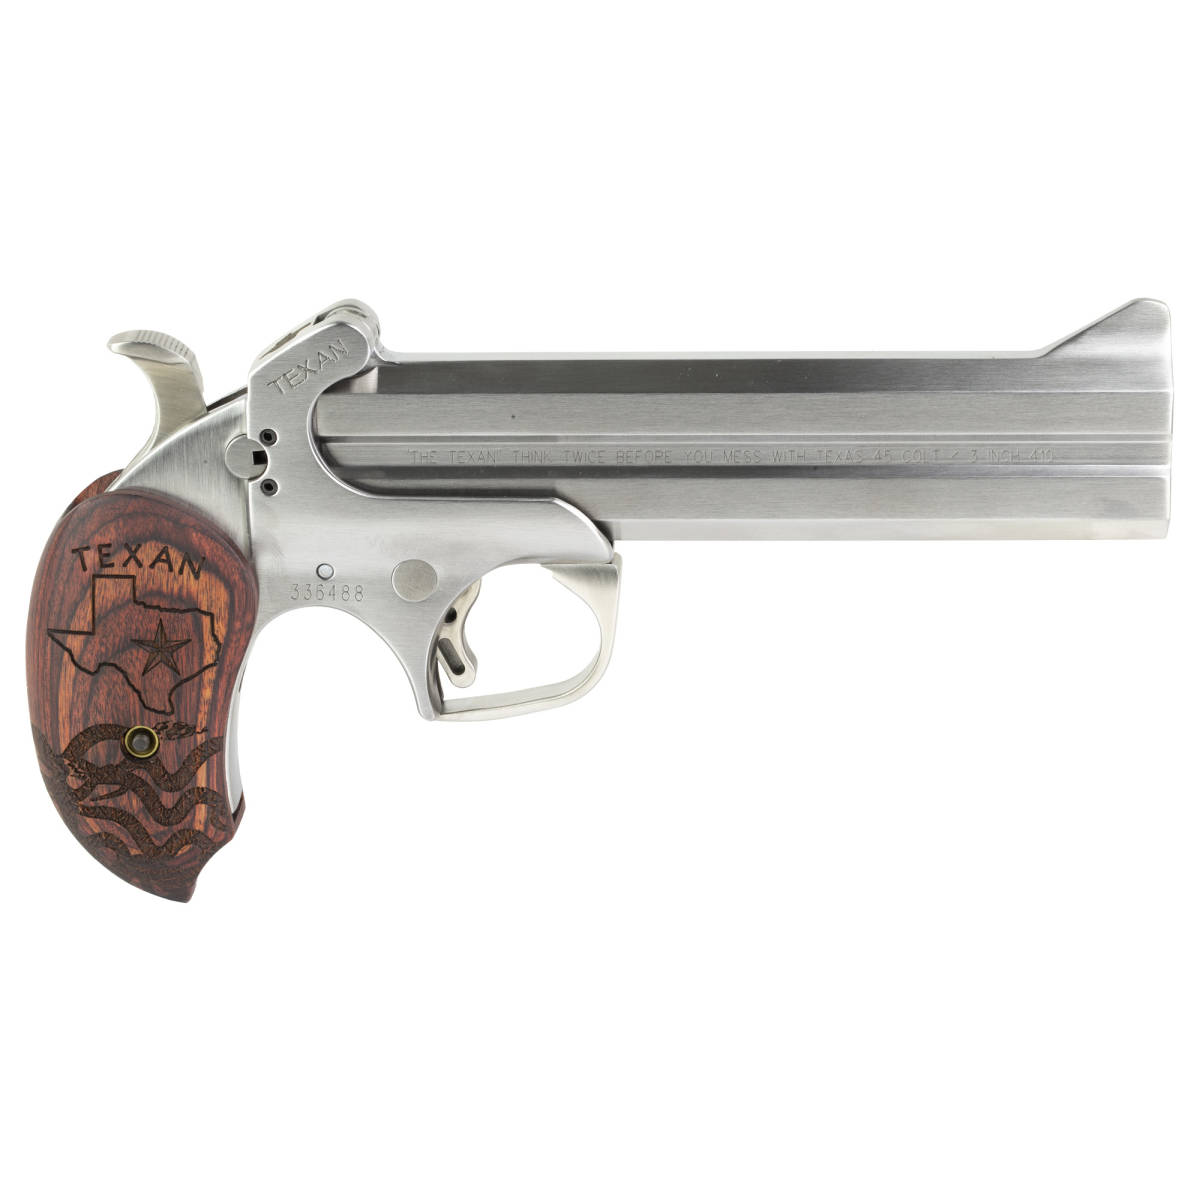 Bond Arms BATX45/410 The Texan, 45 Colt/410 6" barrel with extended grips-img-1